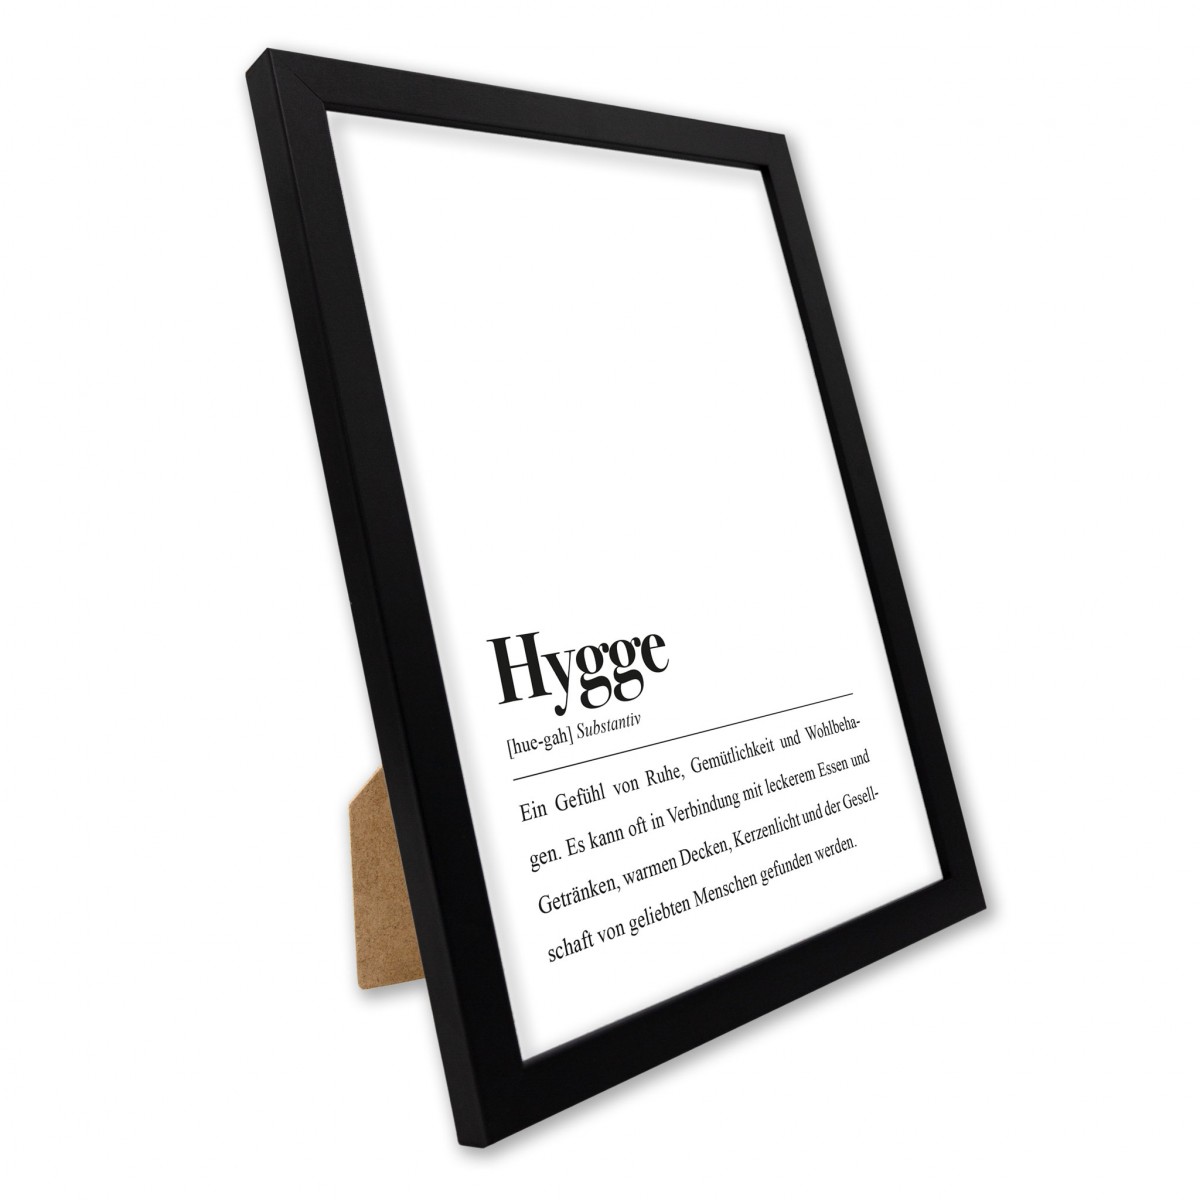 Hygge Definition: DIN A4 Poster